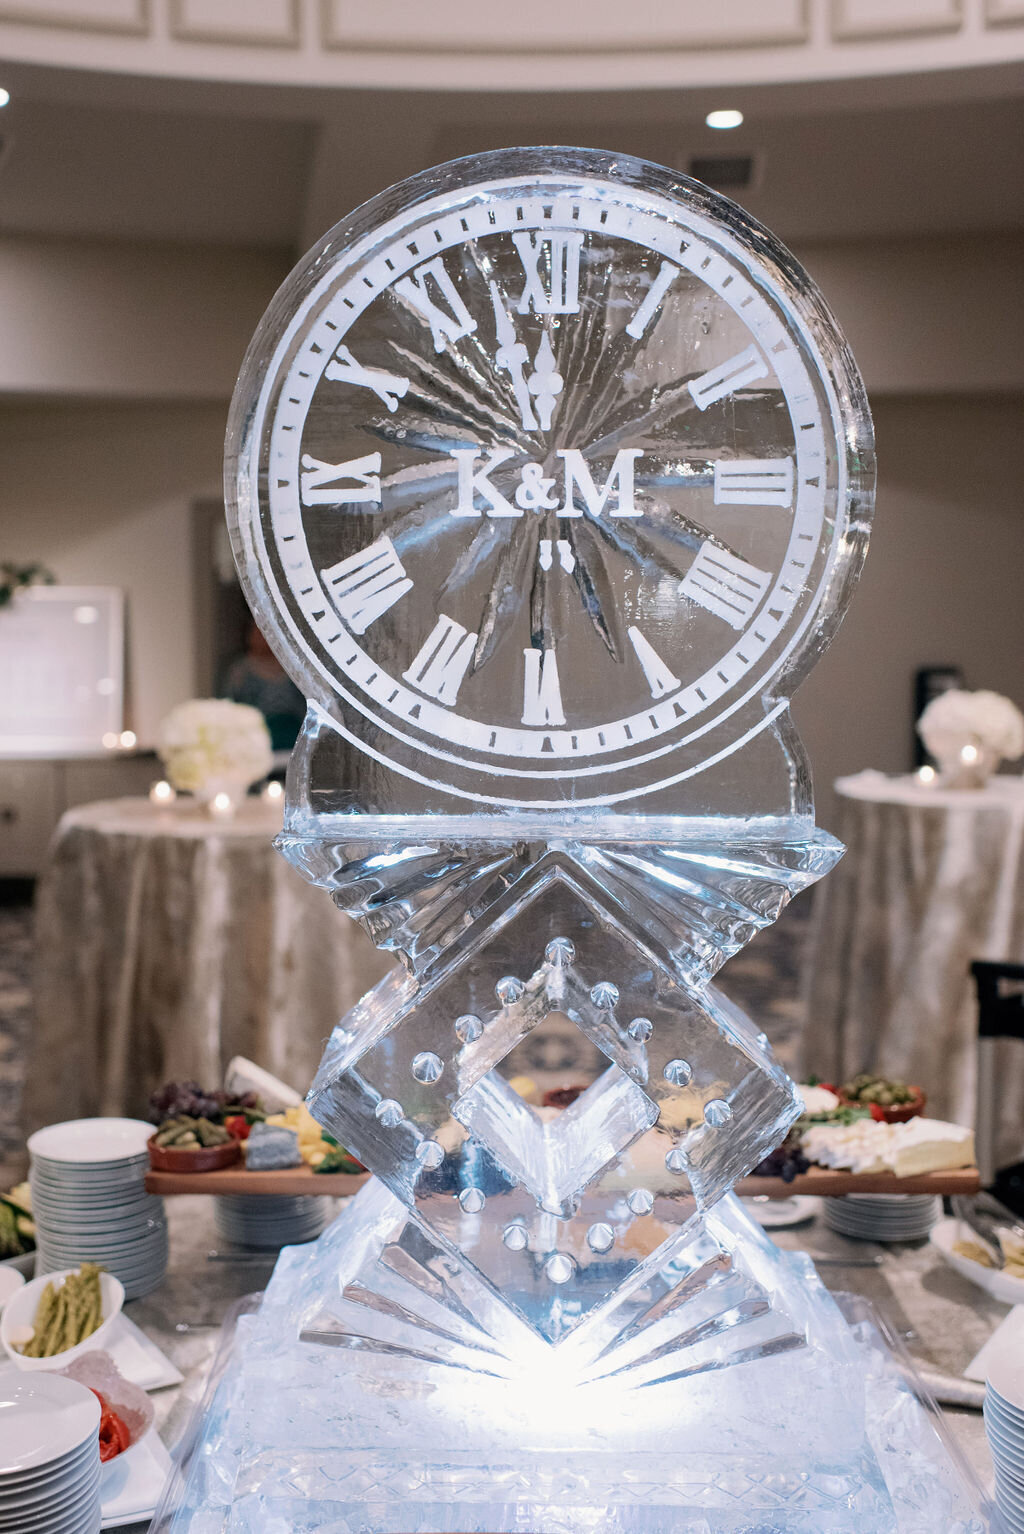 New Years Ice Sculpture